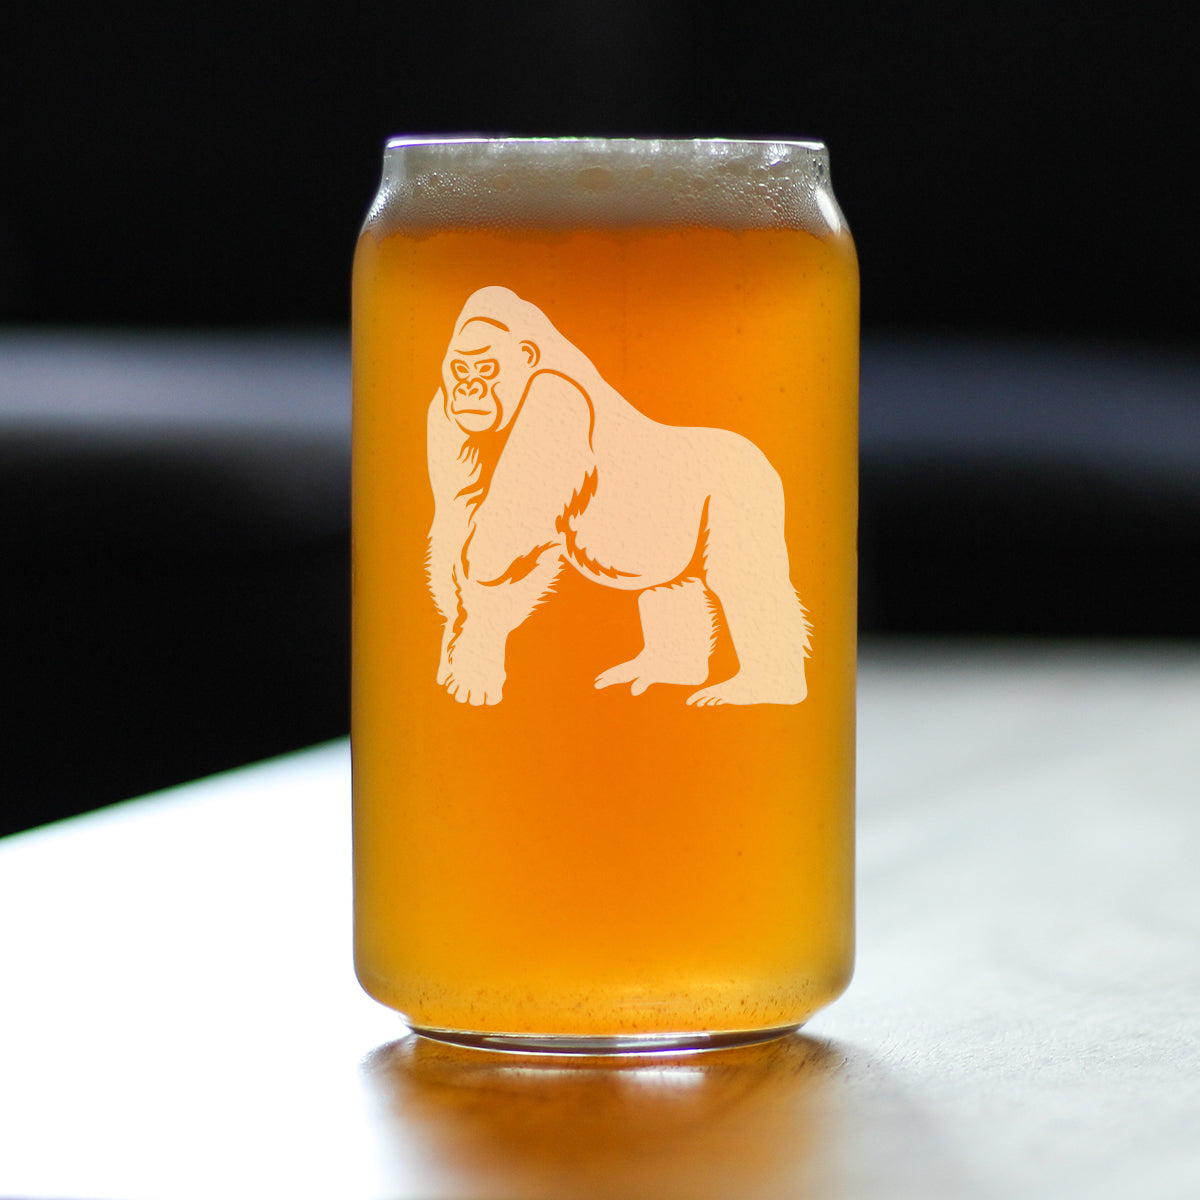 Gorilla Beer Can Pint Glass - Fun Wild Animal Themed Decor and Gifts for Lovers of Apes and Monkeys - 16 Oz Glasses